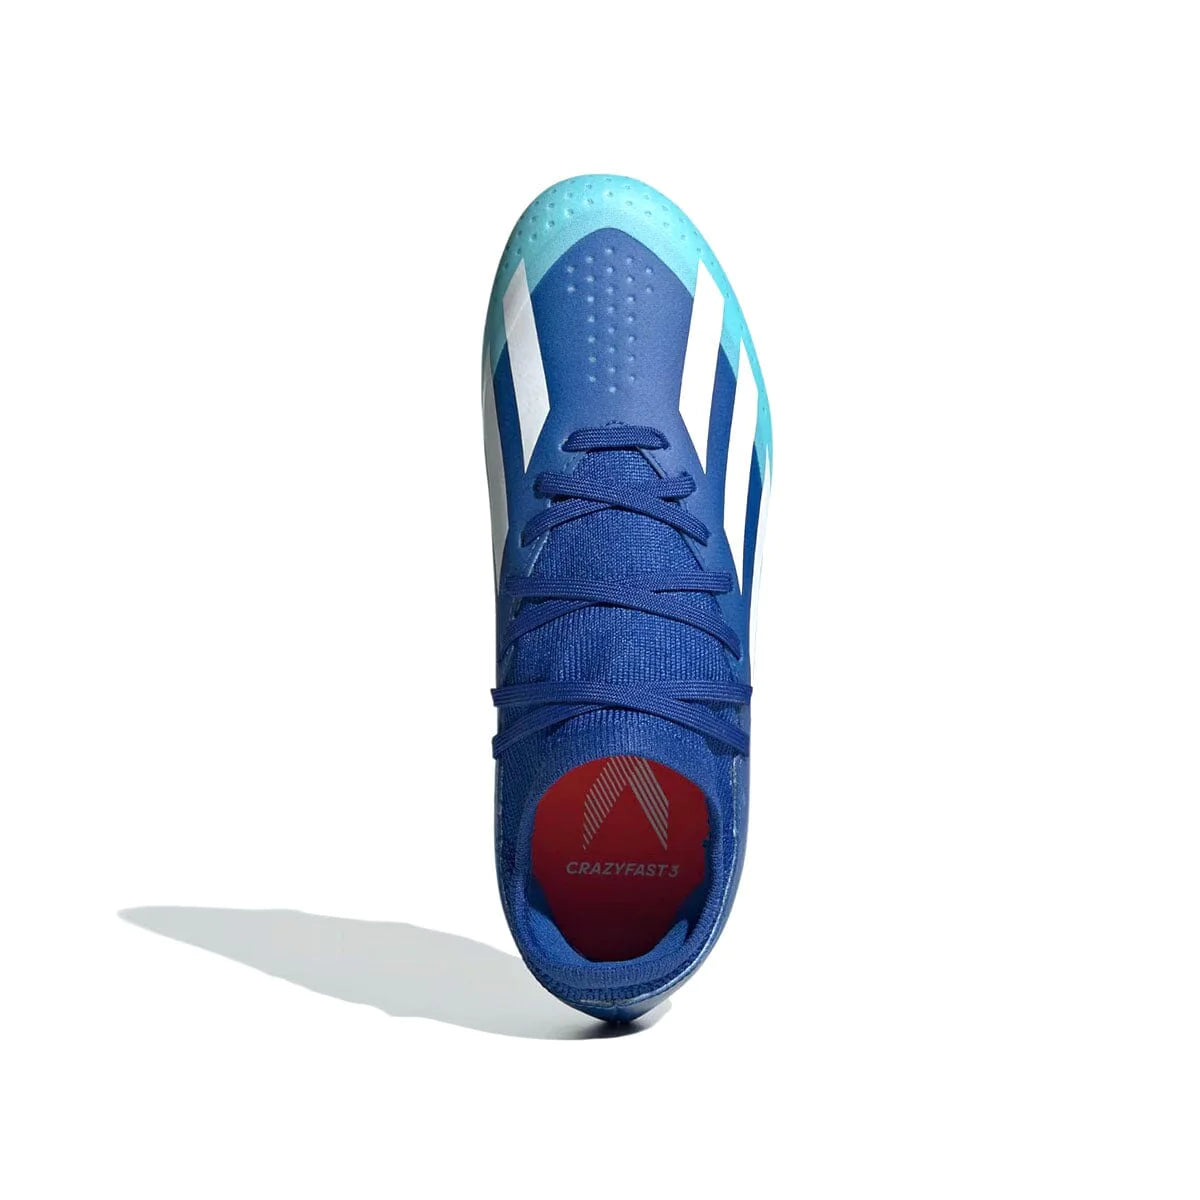 adidas X CrazyFast.3 USA Royal/White Bright Red Firm – /Solar Zone ID9354 Ground FG - Cleat Junior Soccer Soccer